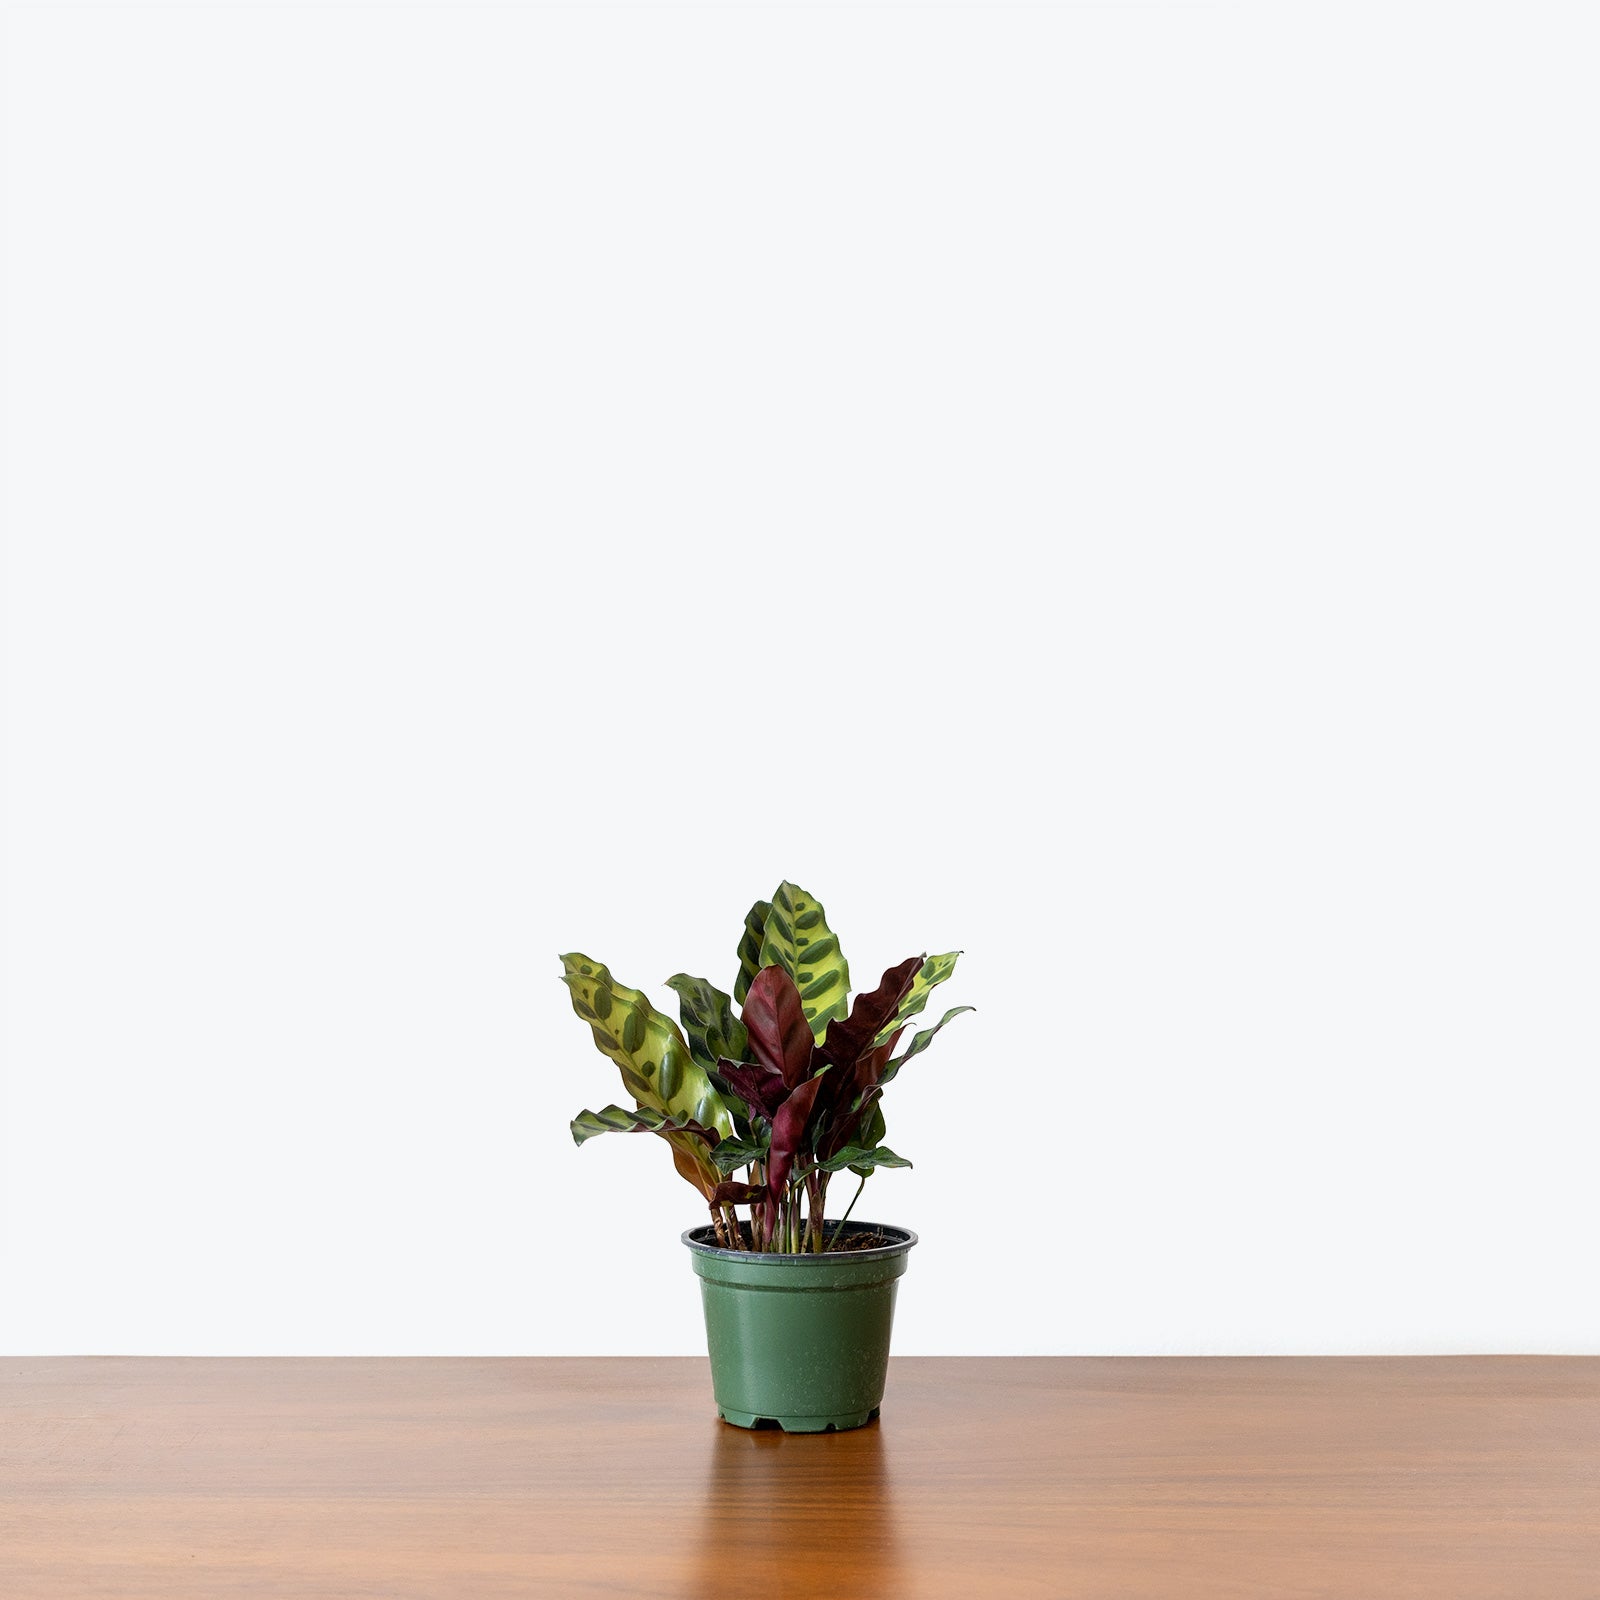 Calathea Lancifolia Rattlesnake | Care Guide and Pro Tips - Delivery from Toronto across Canada - JOMO Studio